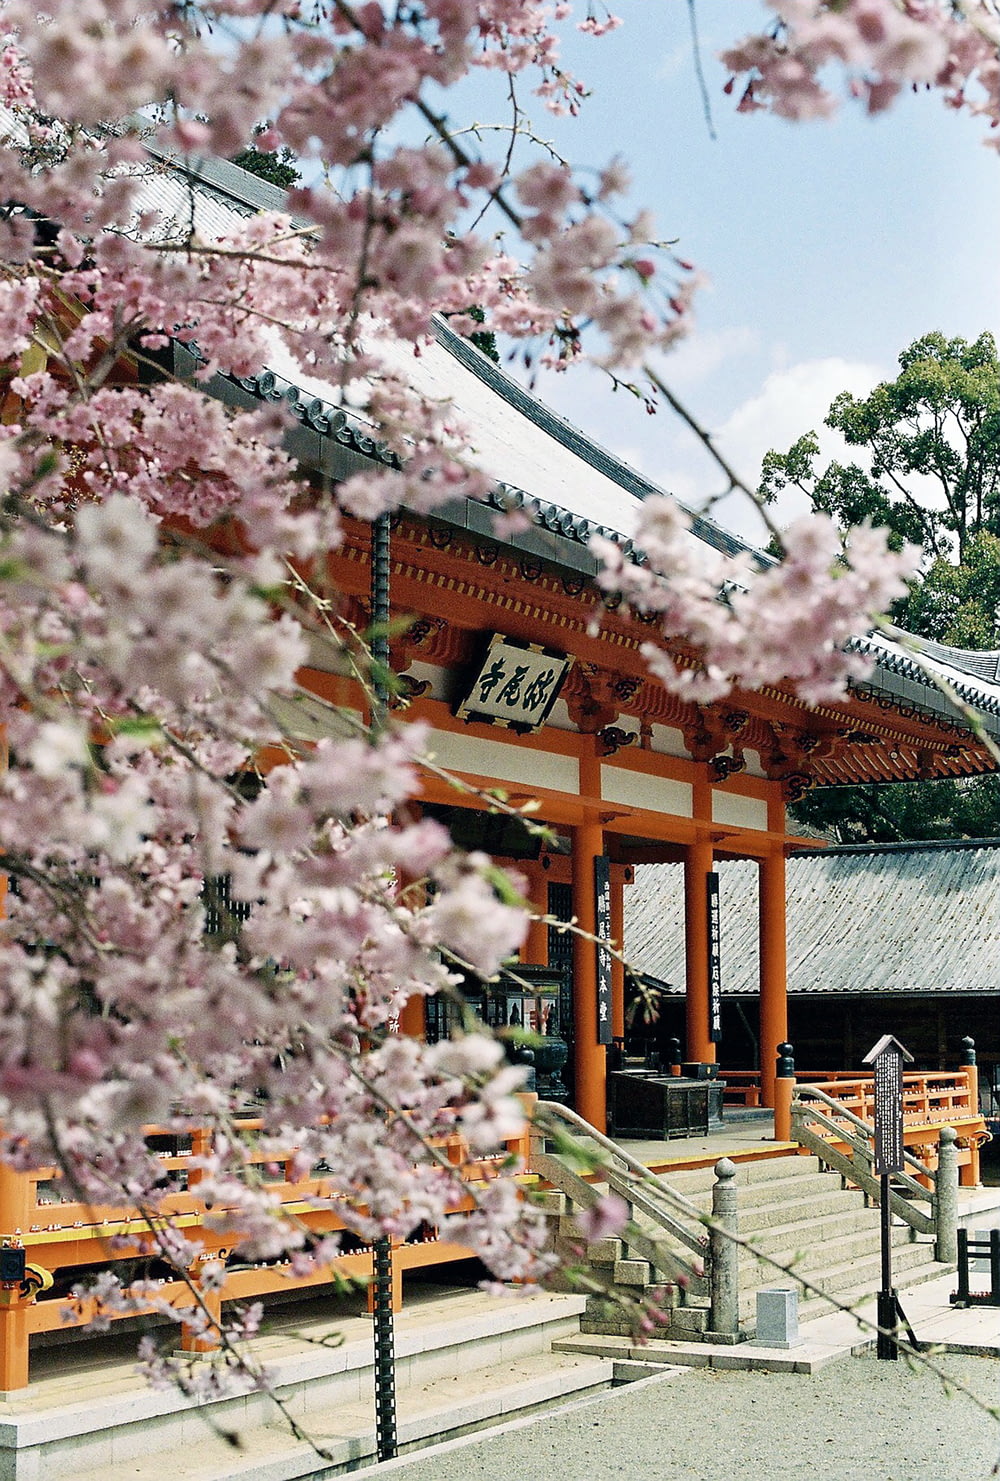 pink cherry blossom tree near brown wooden building during daytime